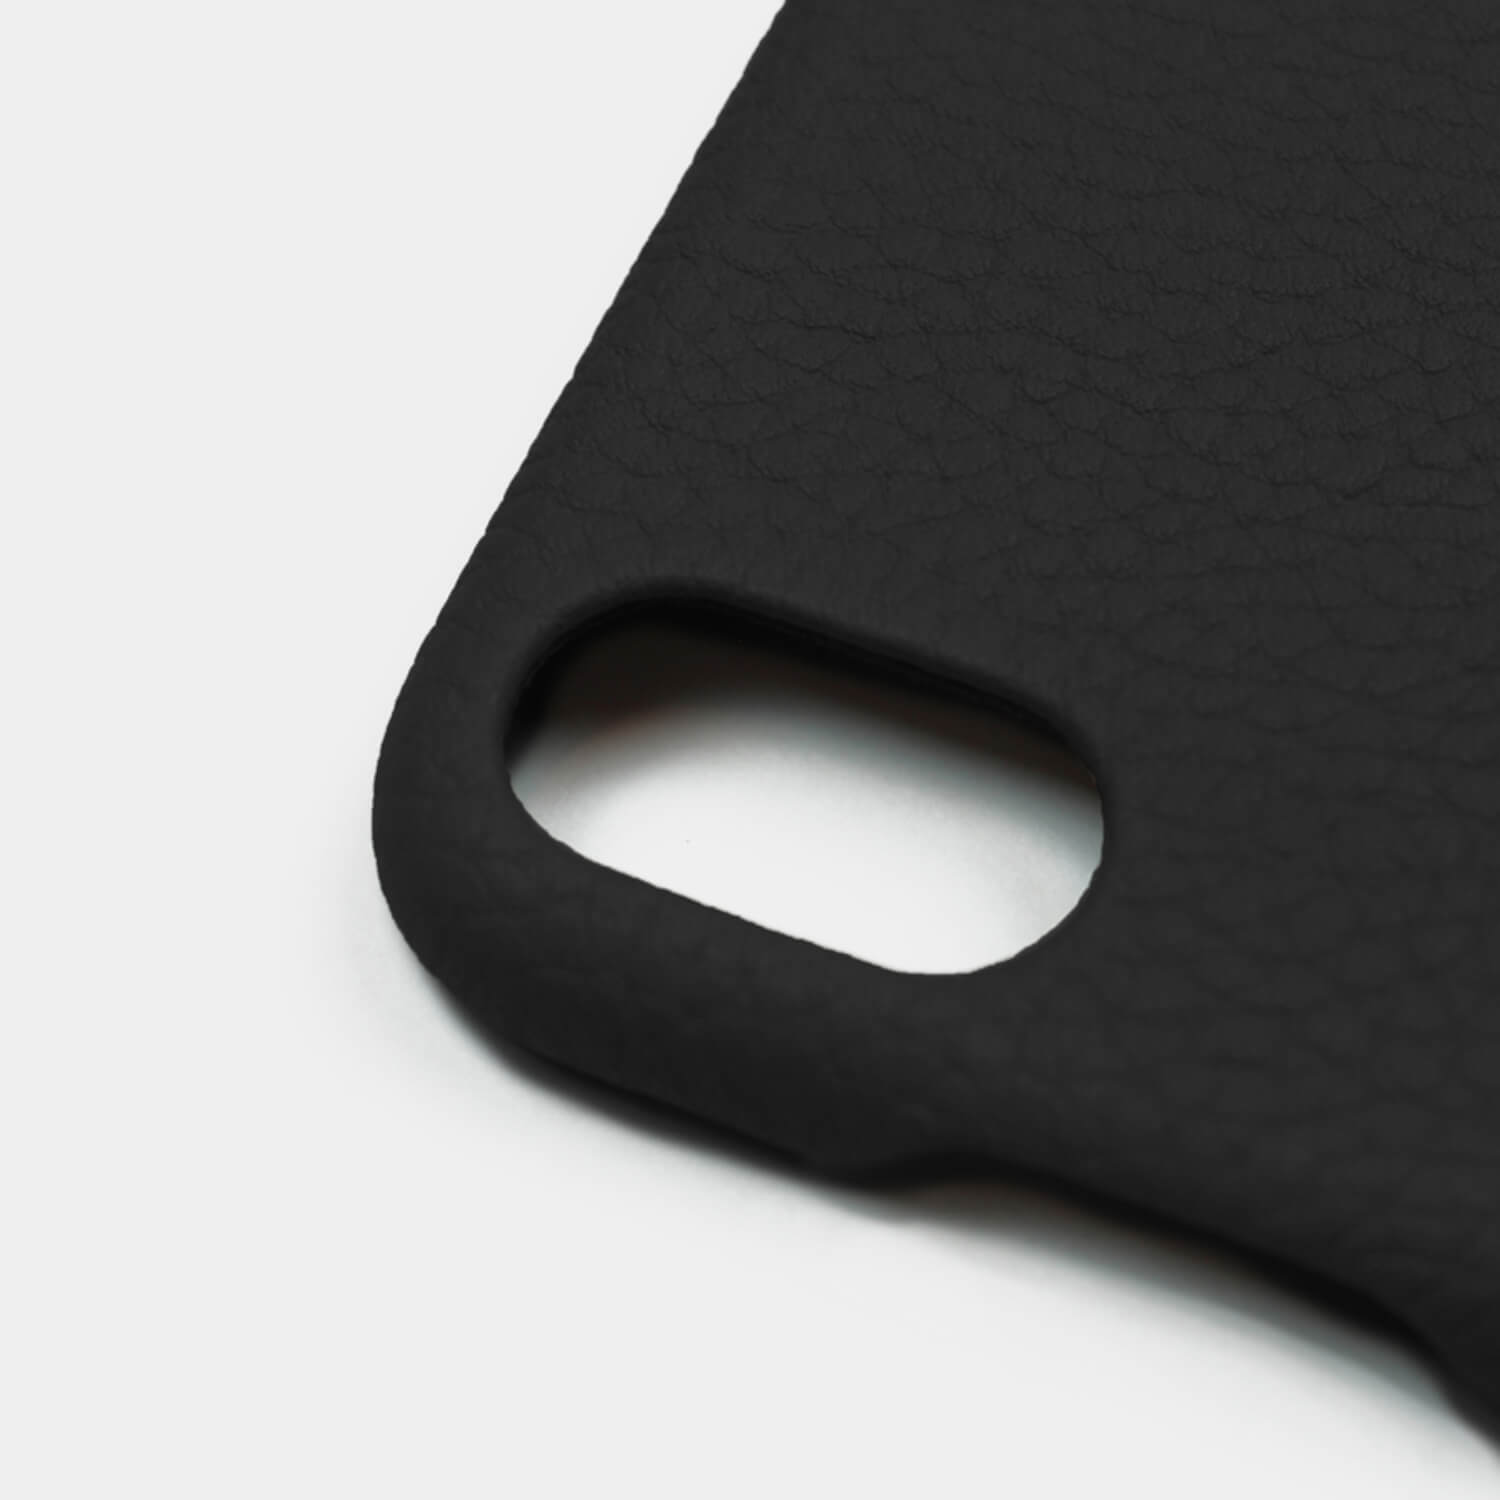 Pebble grain leather iPhone case for all models, moulds to the case to protect the iPhone